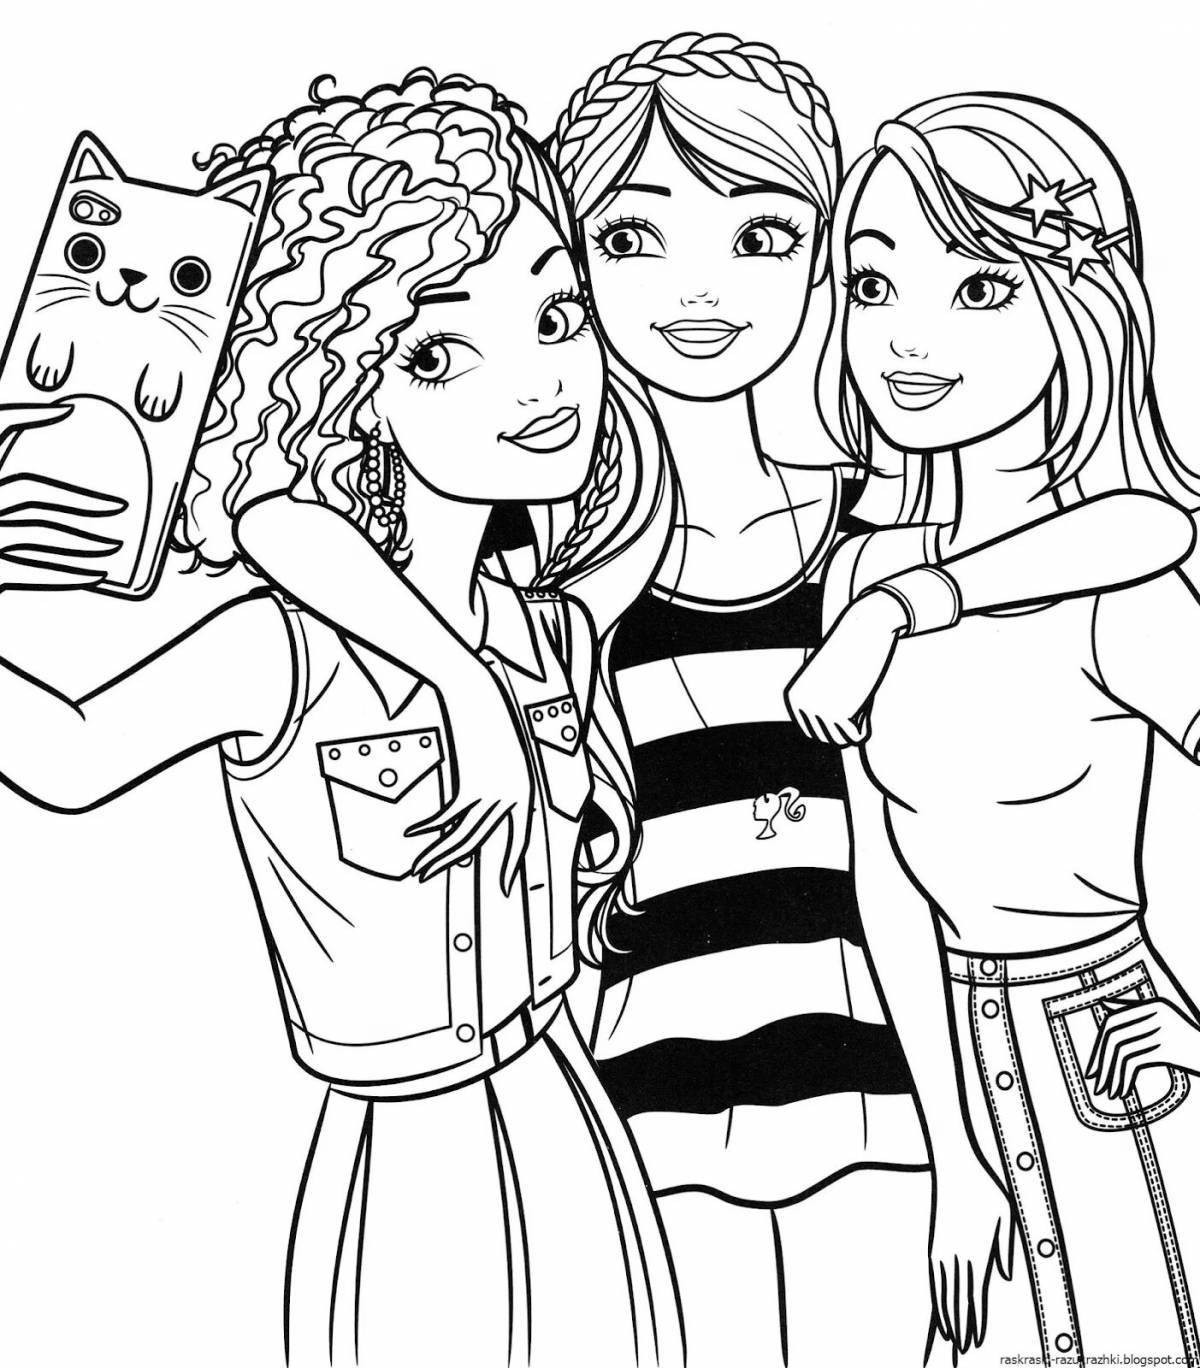 A fascinating coloring book for girls 14 years old, beautiful